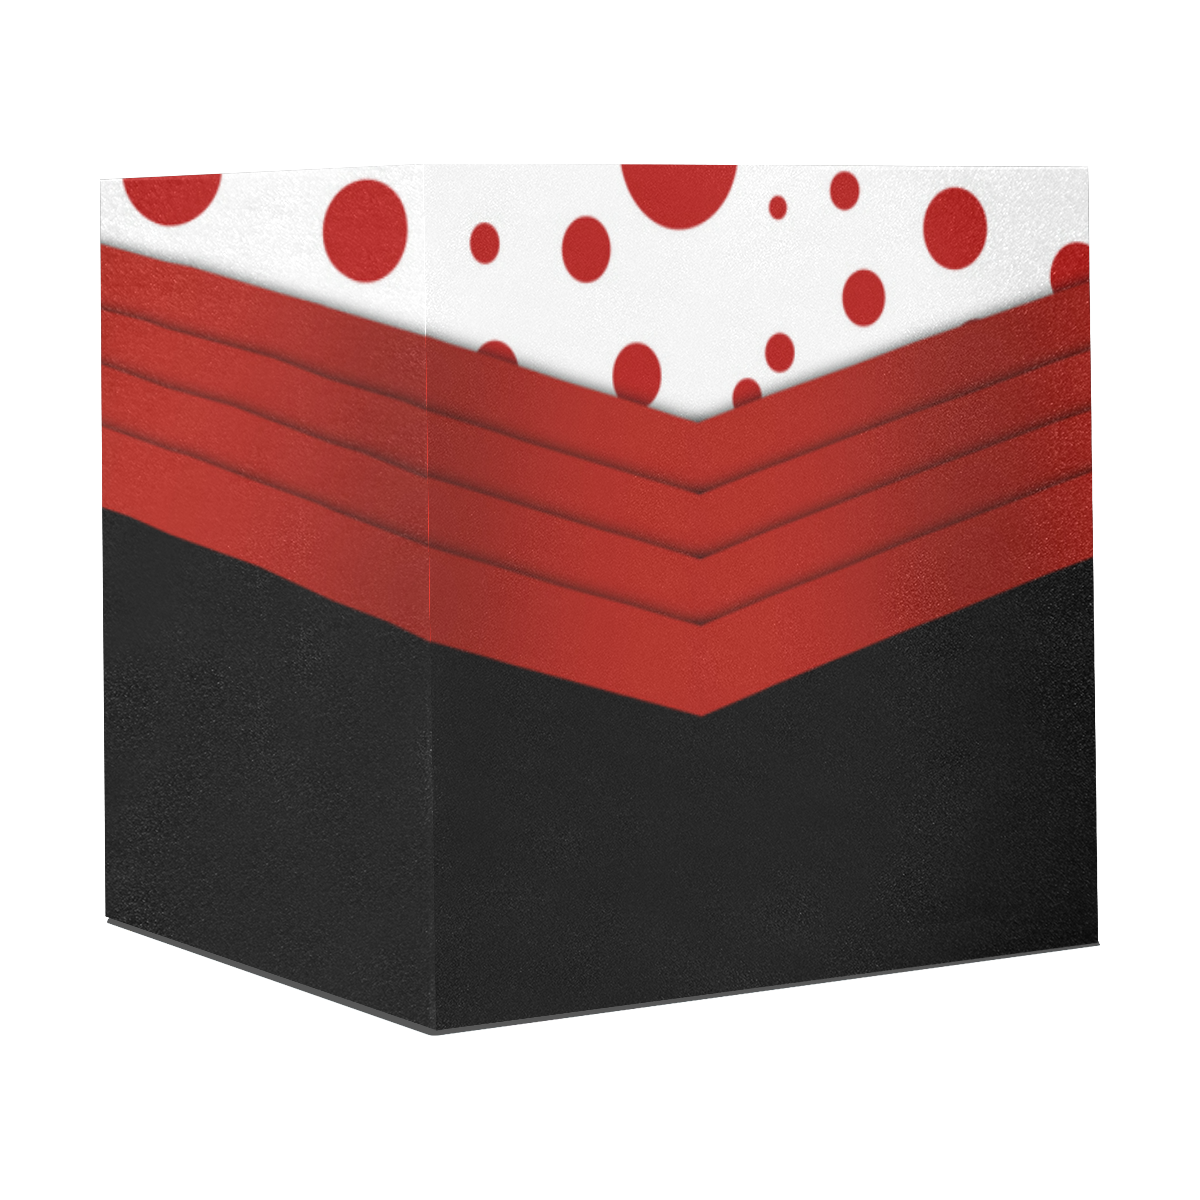 Polka Dots and Red Sash on Black Gift Wrapping Paper 58"x 23" (3 Rolls)